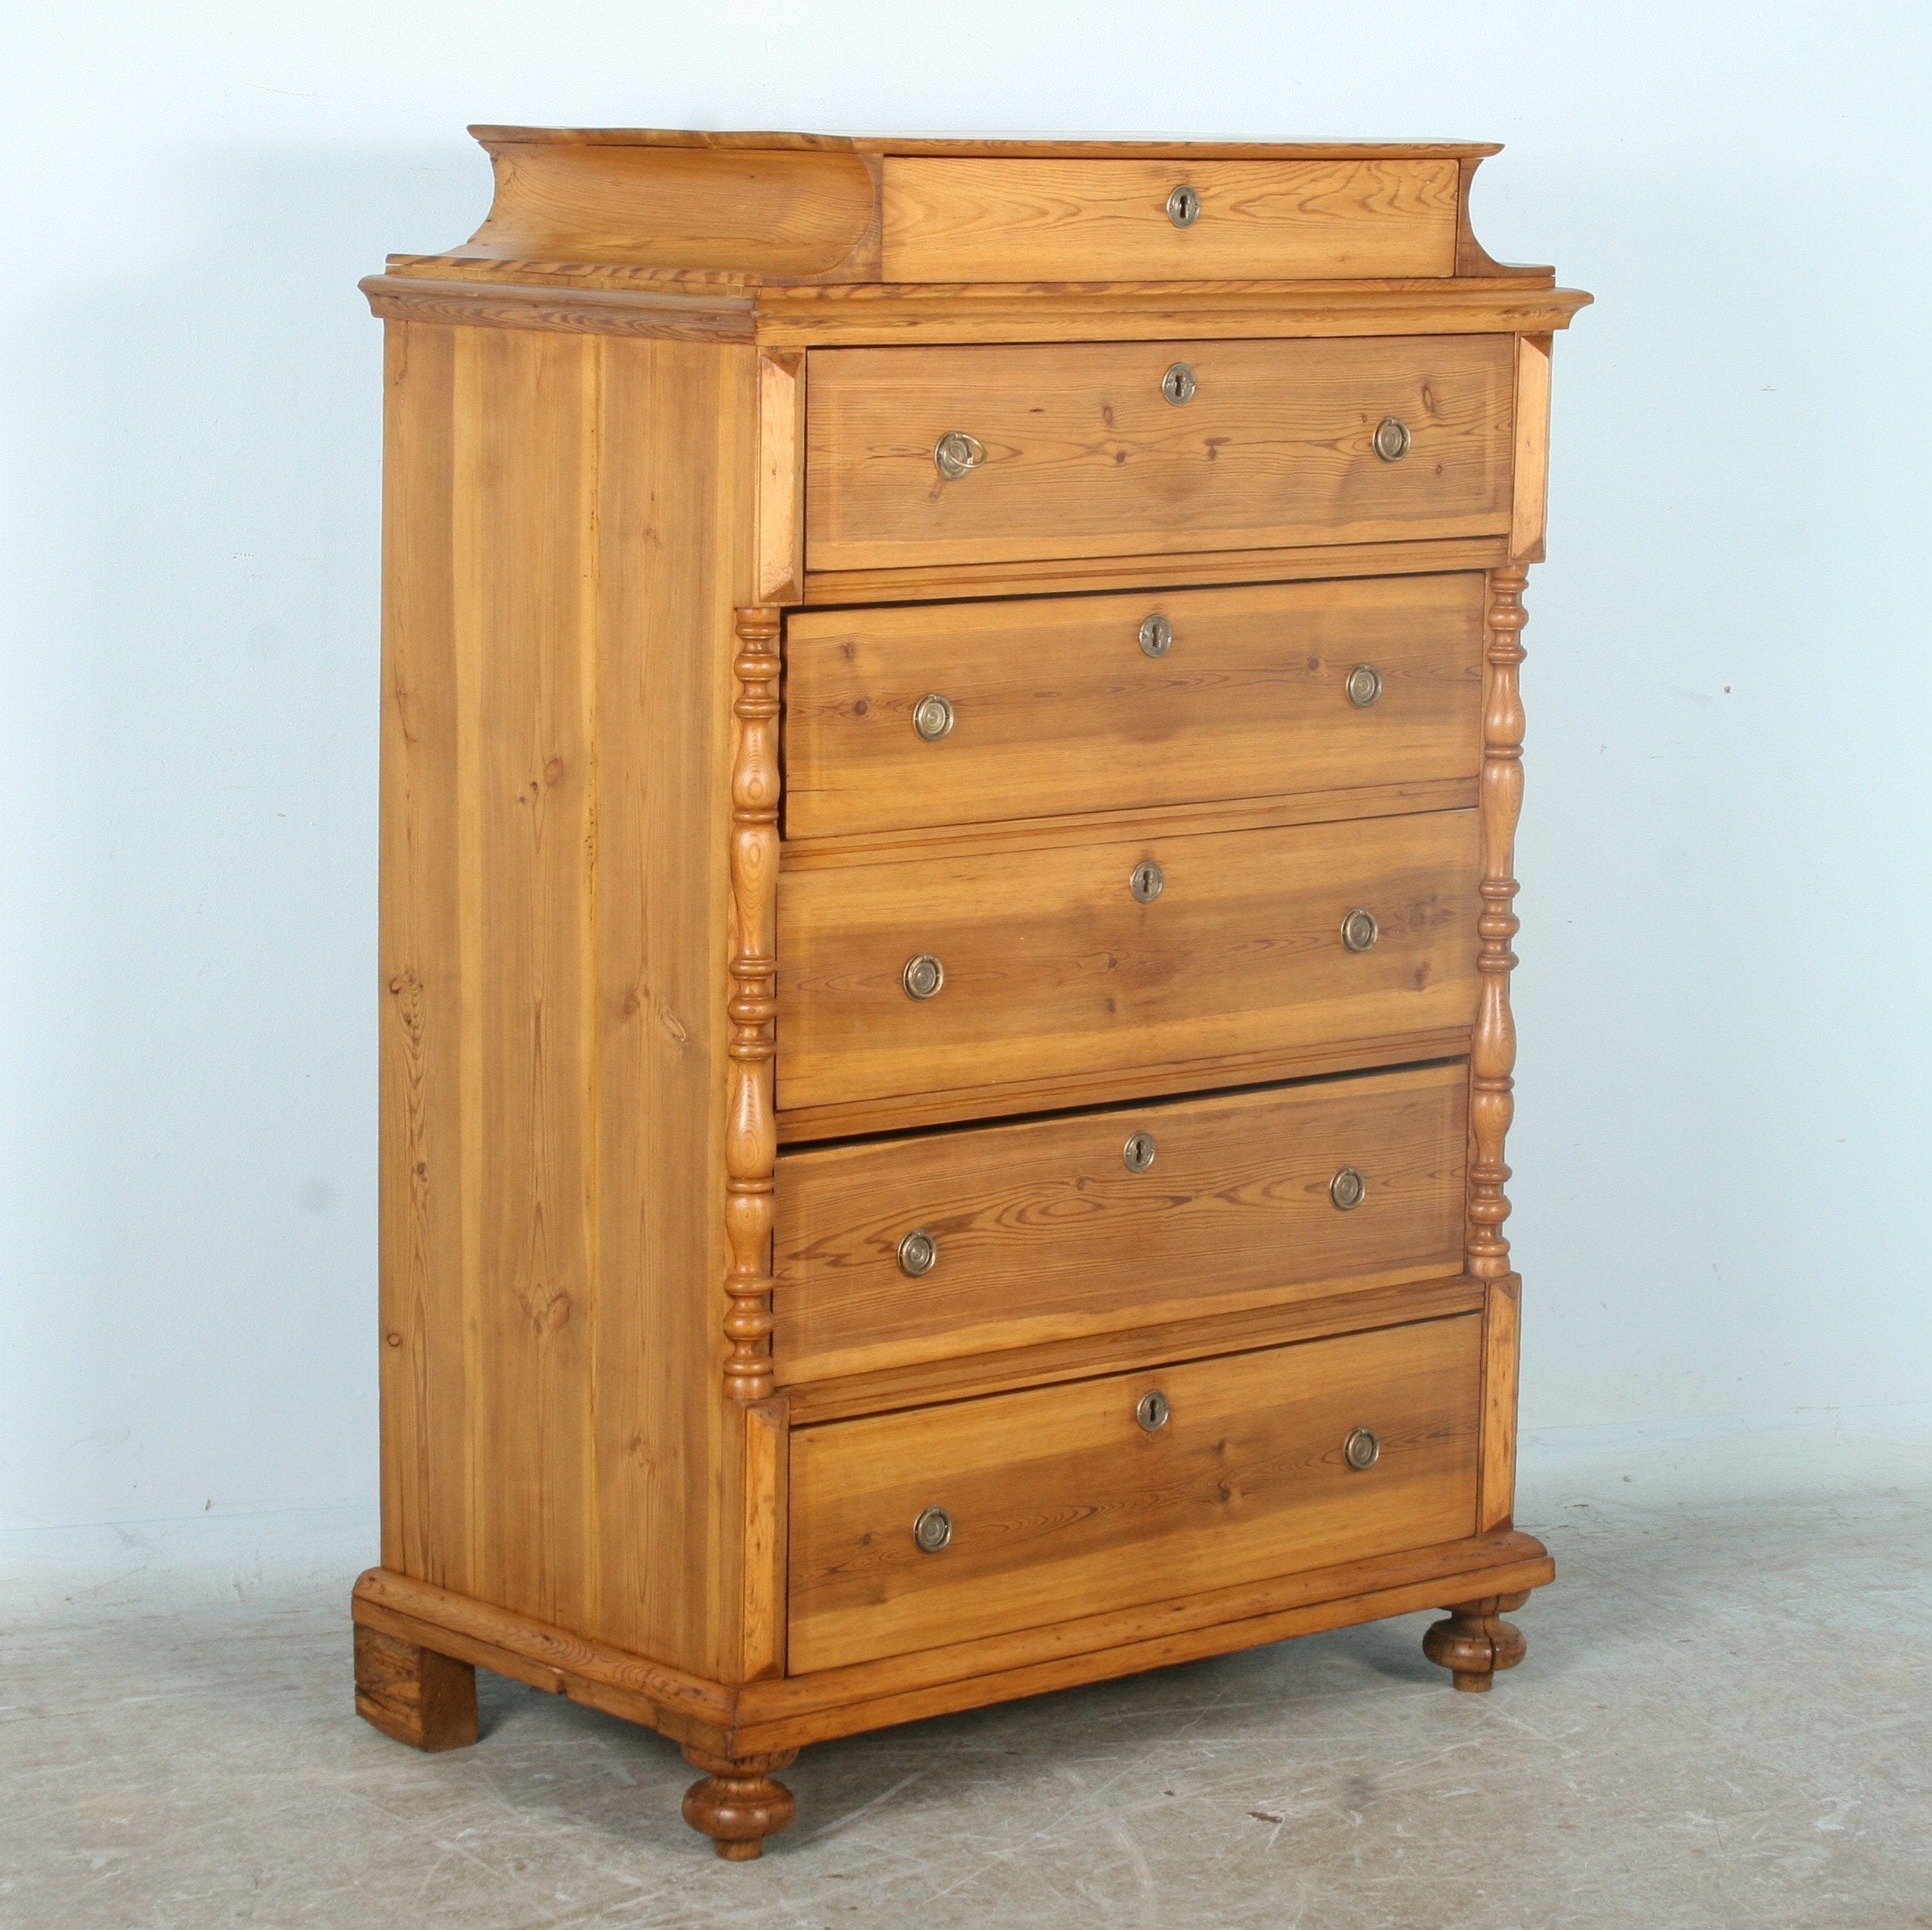 Antique Pine Tall Chest of Drawers or Highboy, Sweden circa 1850-70